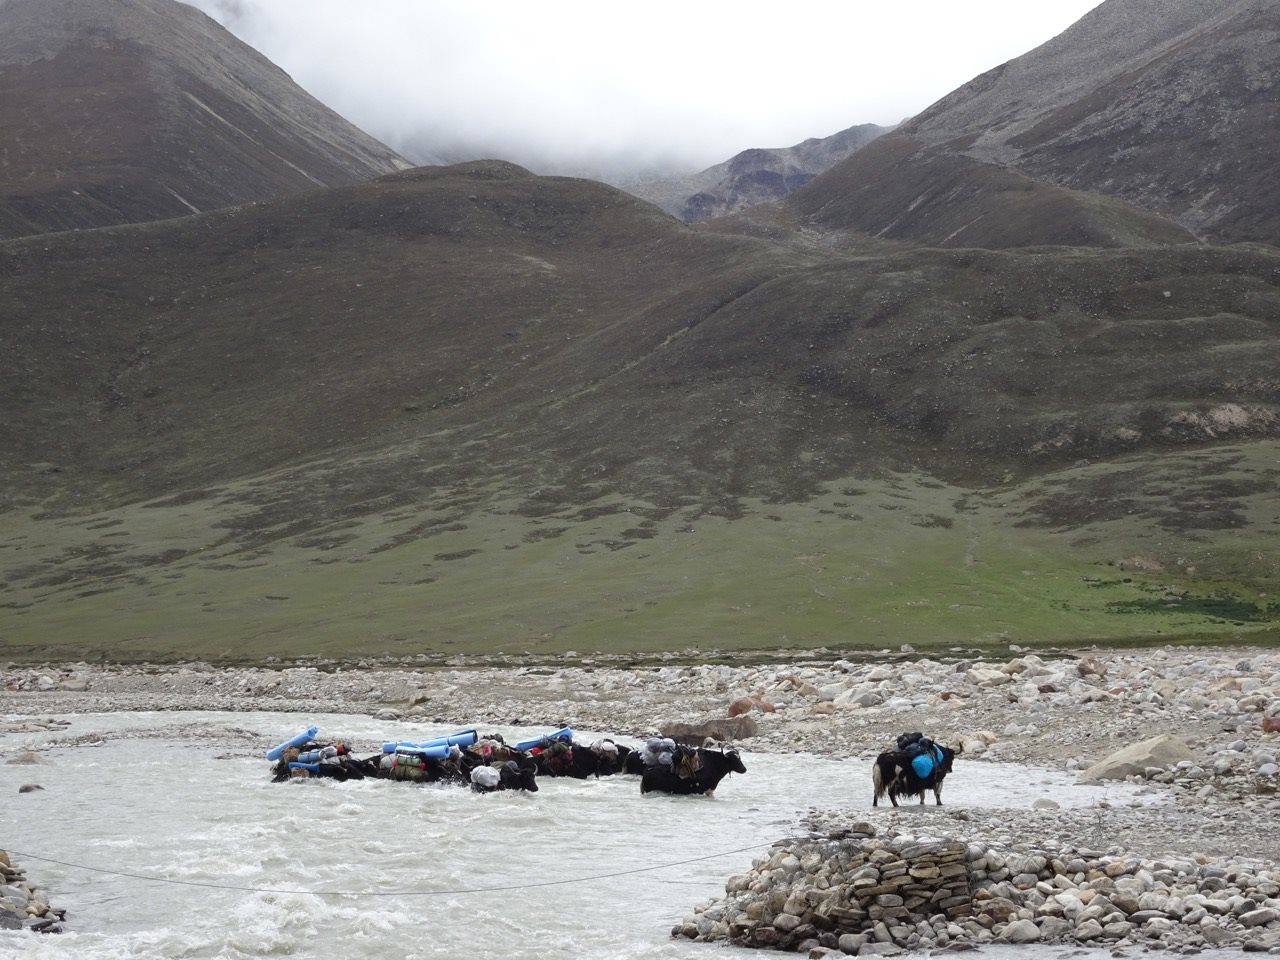 Thereafter it’s a 4 days trek to the base camp for Lhonak lake… crossing several streams and passes higher than 17,000 feet.